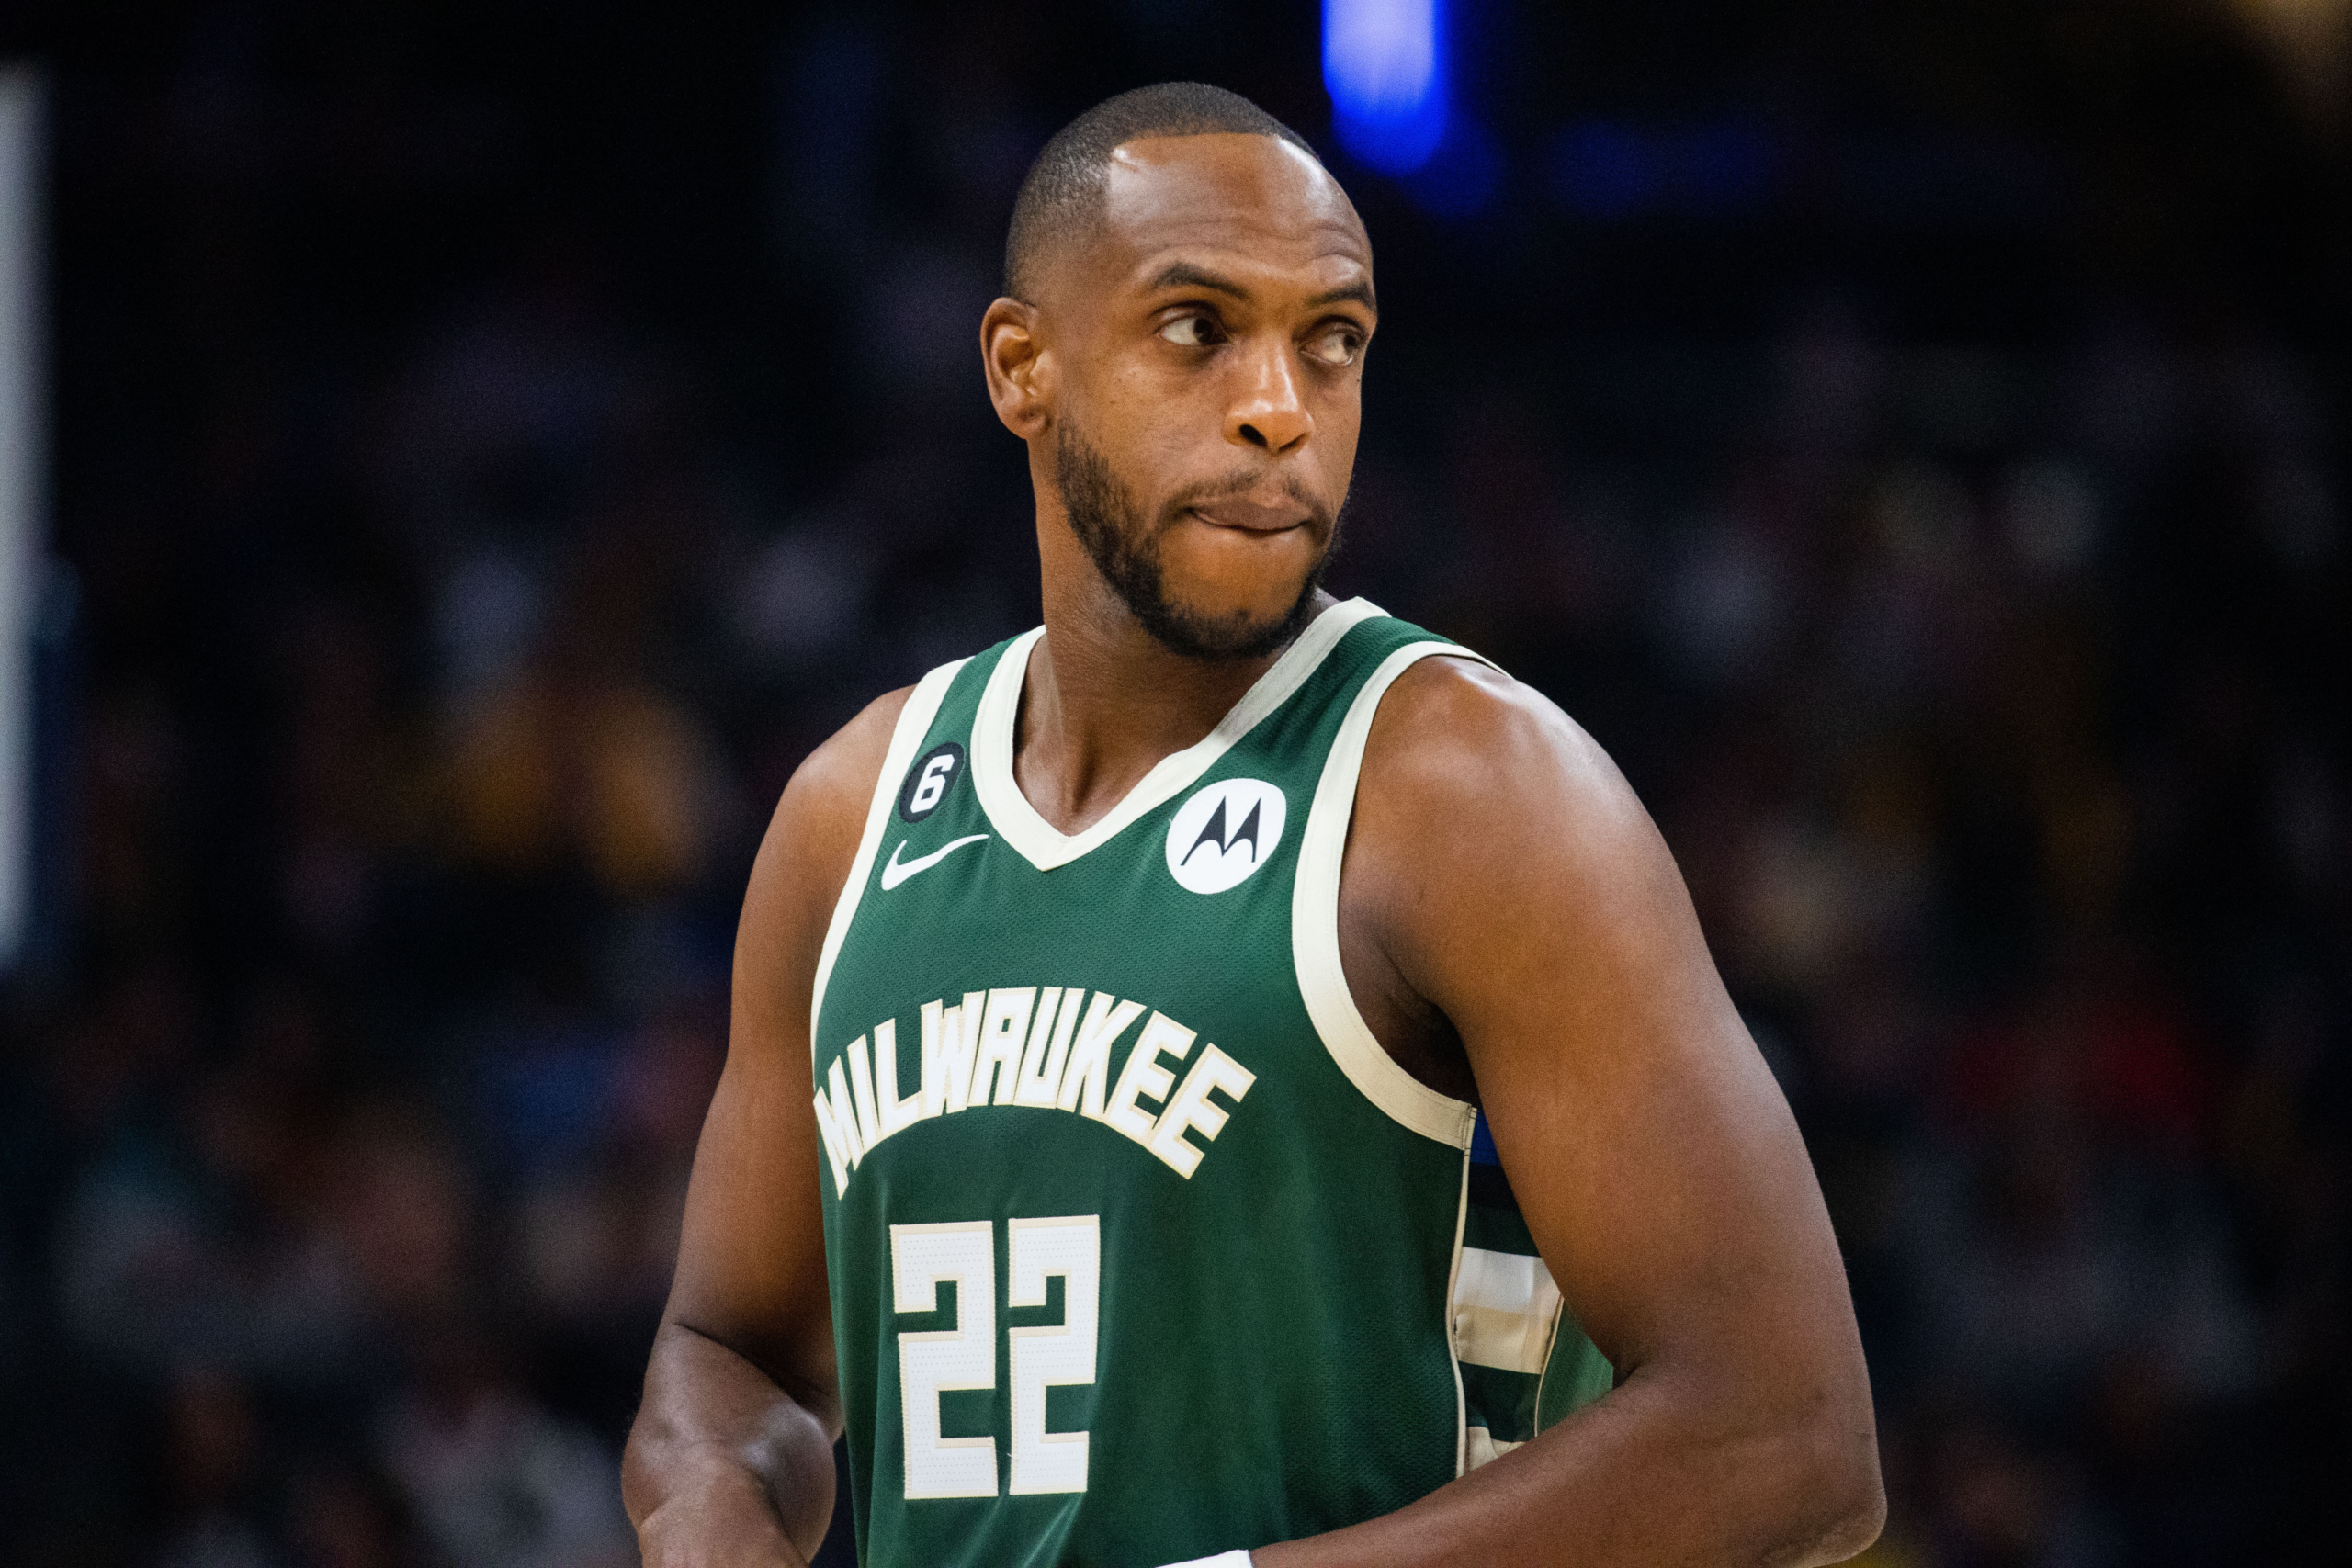 Basketball Forever - The Milwaukee Bucks have reportedly made Khris  Middleton available in trade talks. Middleton averaged 20.1 points, 5.2  rebounds and 4.0 assists last season, whilst shooting 46.6% from the field  and 35.9% from three.